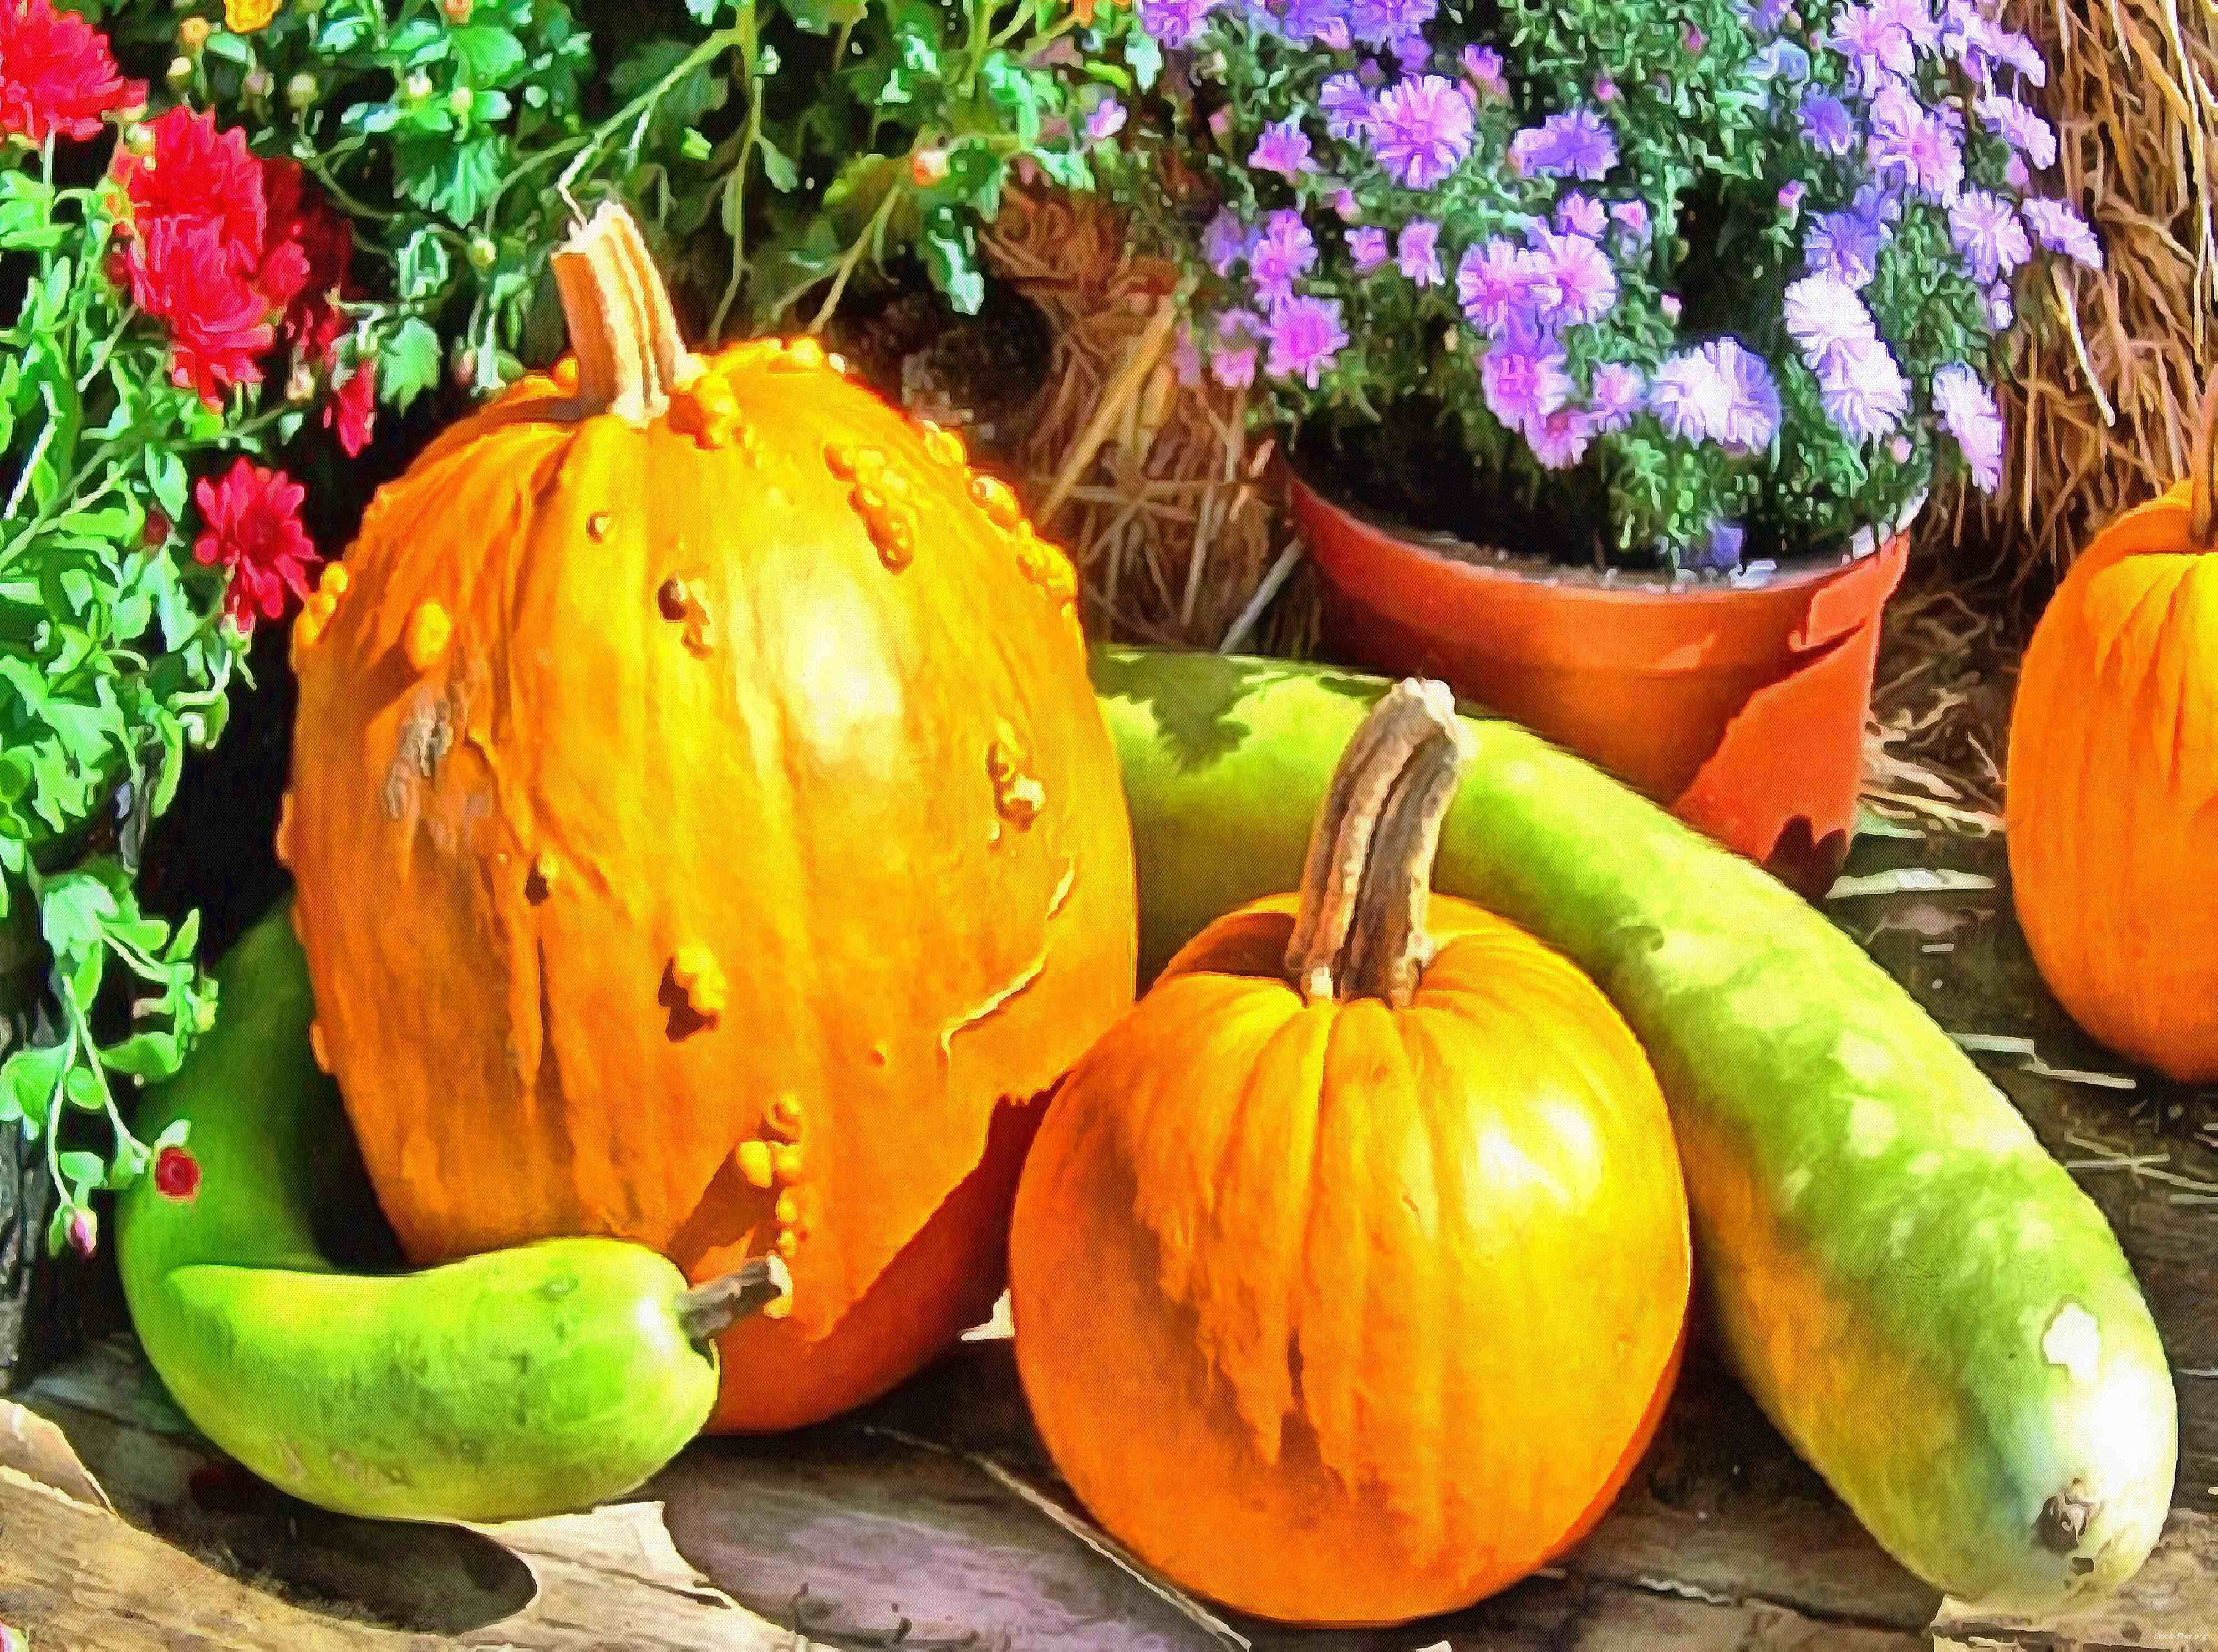 сelebration, pumpkin, holiday, lots of pumpkins, garden, spooky, halloween -  stock free photos, public domain images, download free images, free stock images, public domain